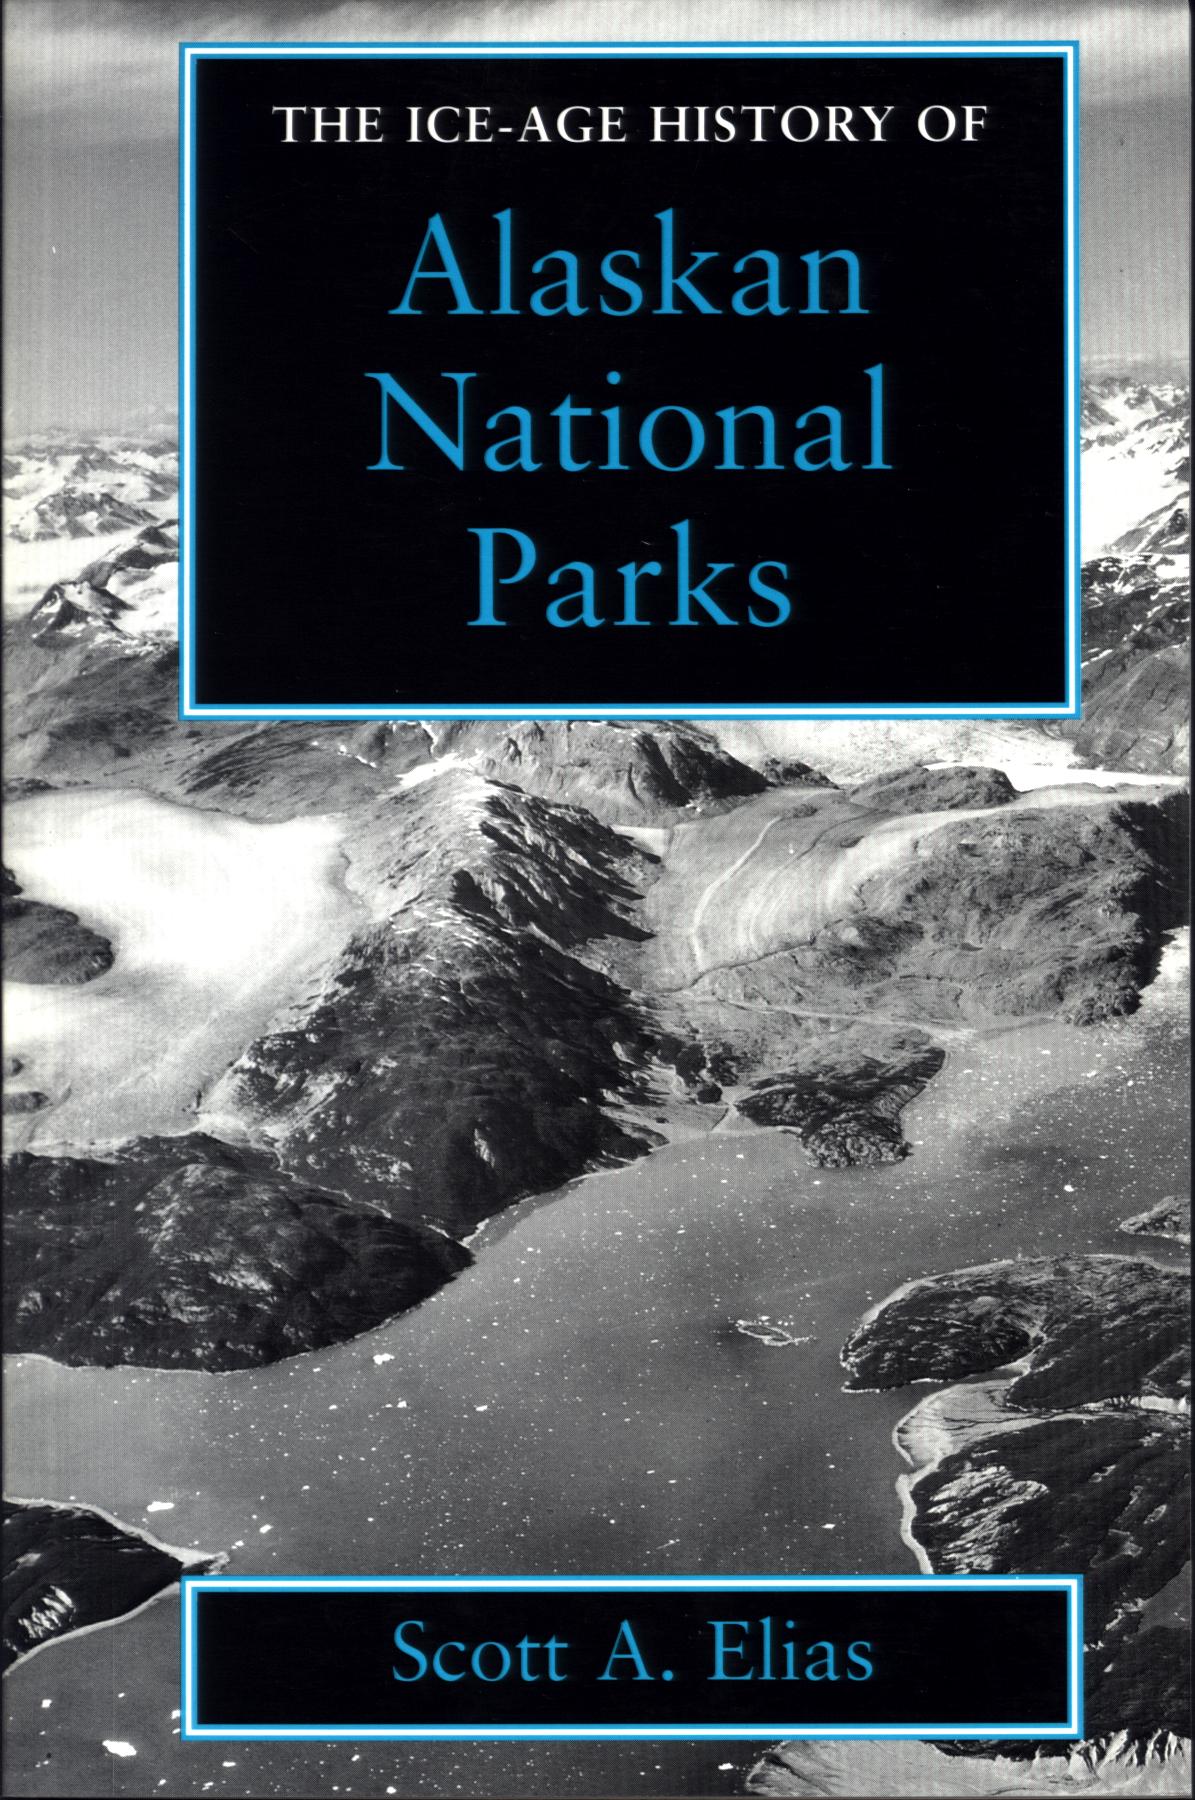 THE ICE-AGE HISTORY OF ALASKAN NATIONAL PARKS